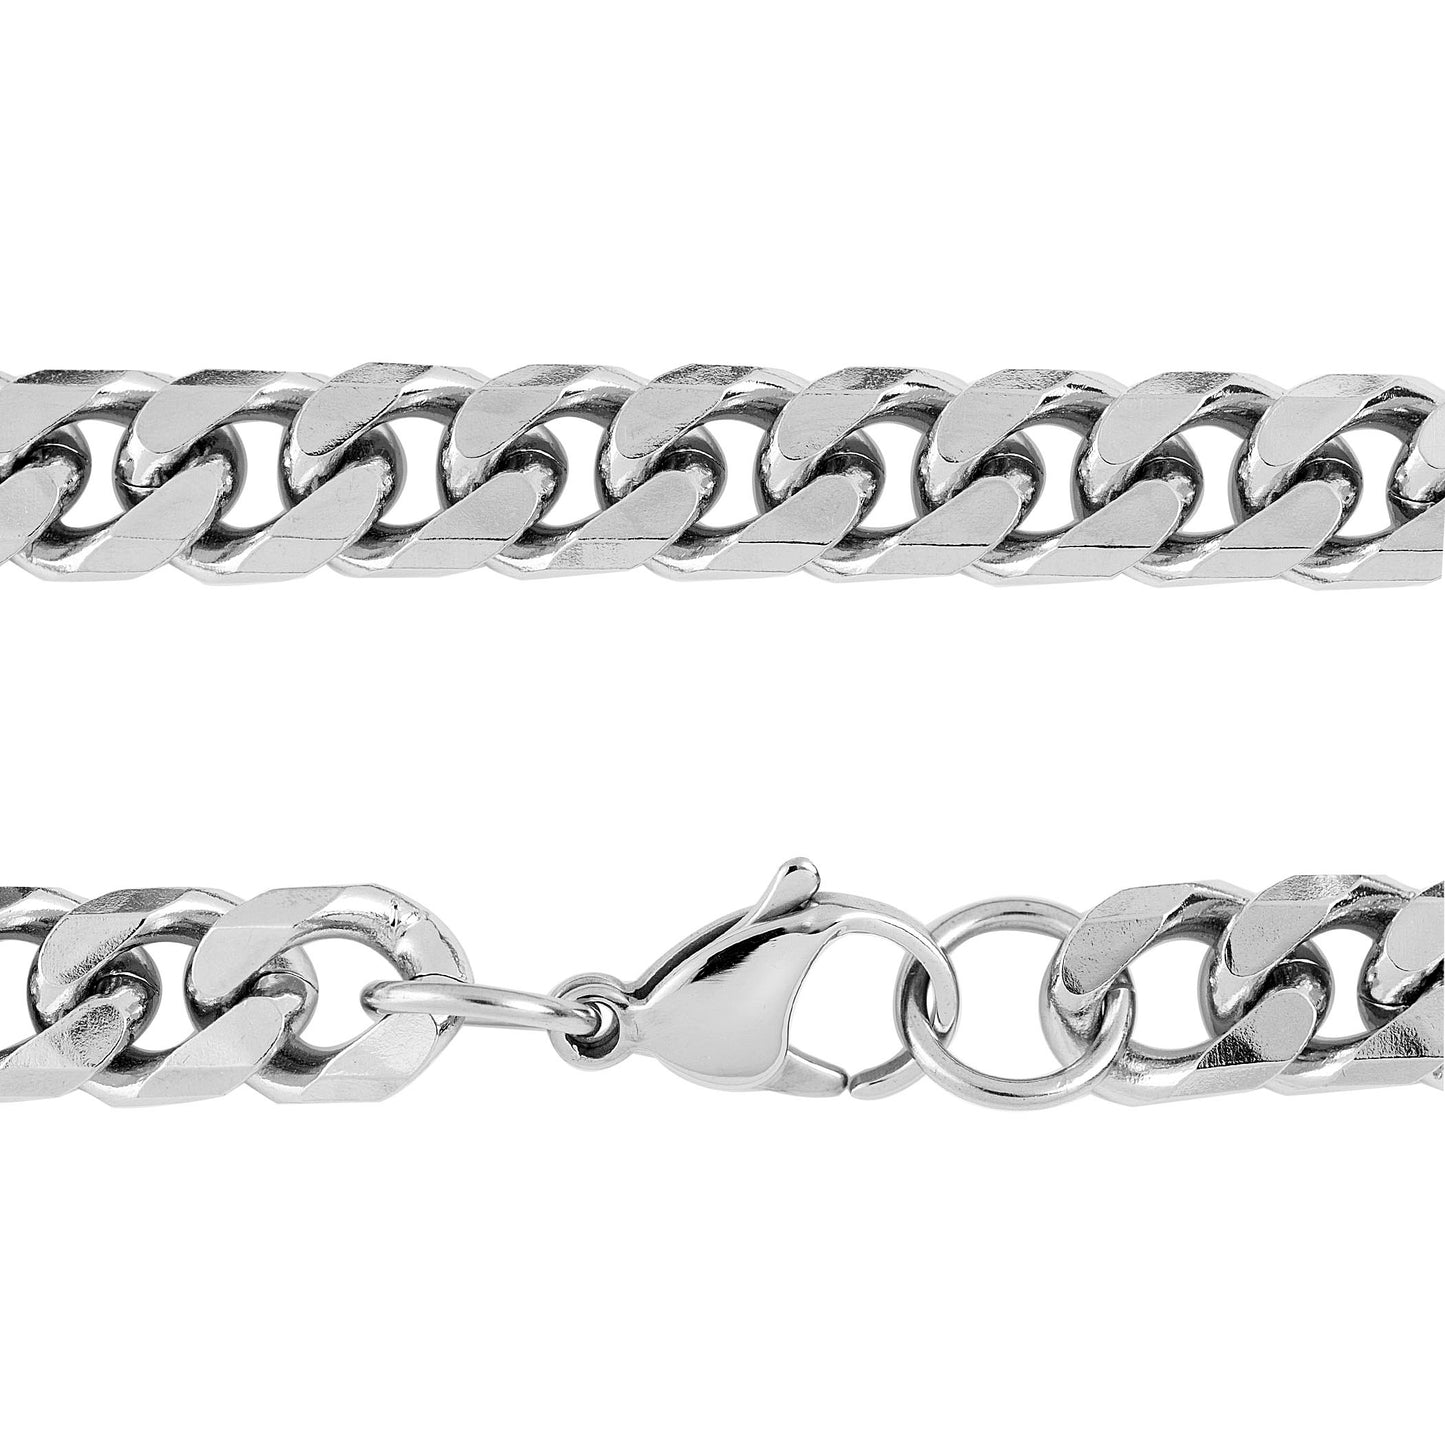 Men's Polished Beveled Cuban Link Chain Stainless Steel Necklace (6mm) - 27"